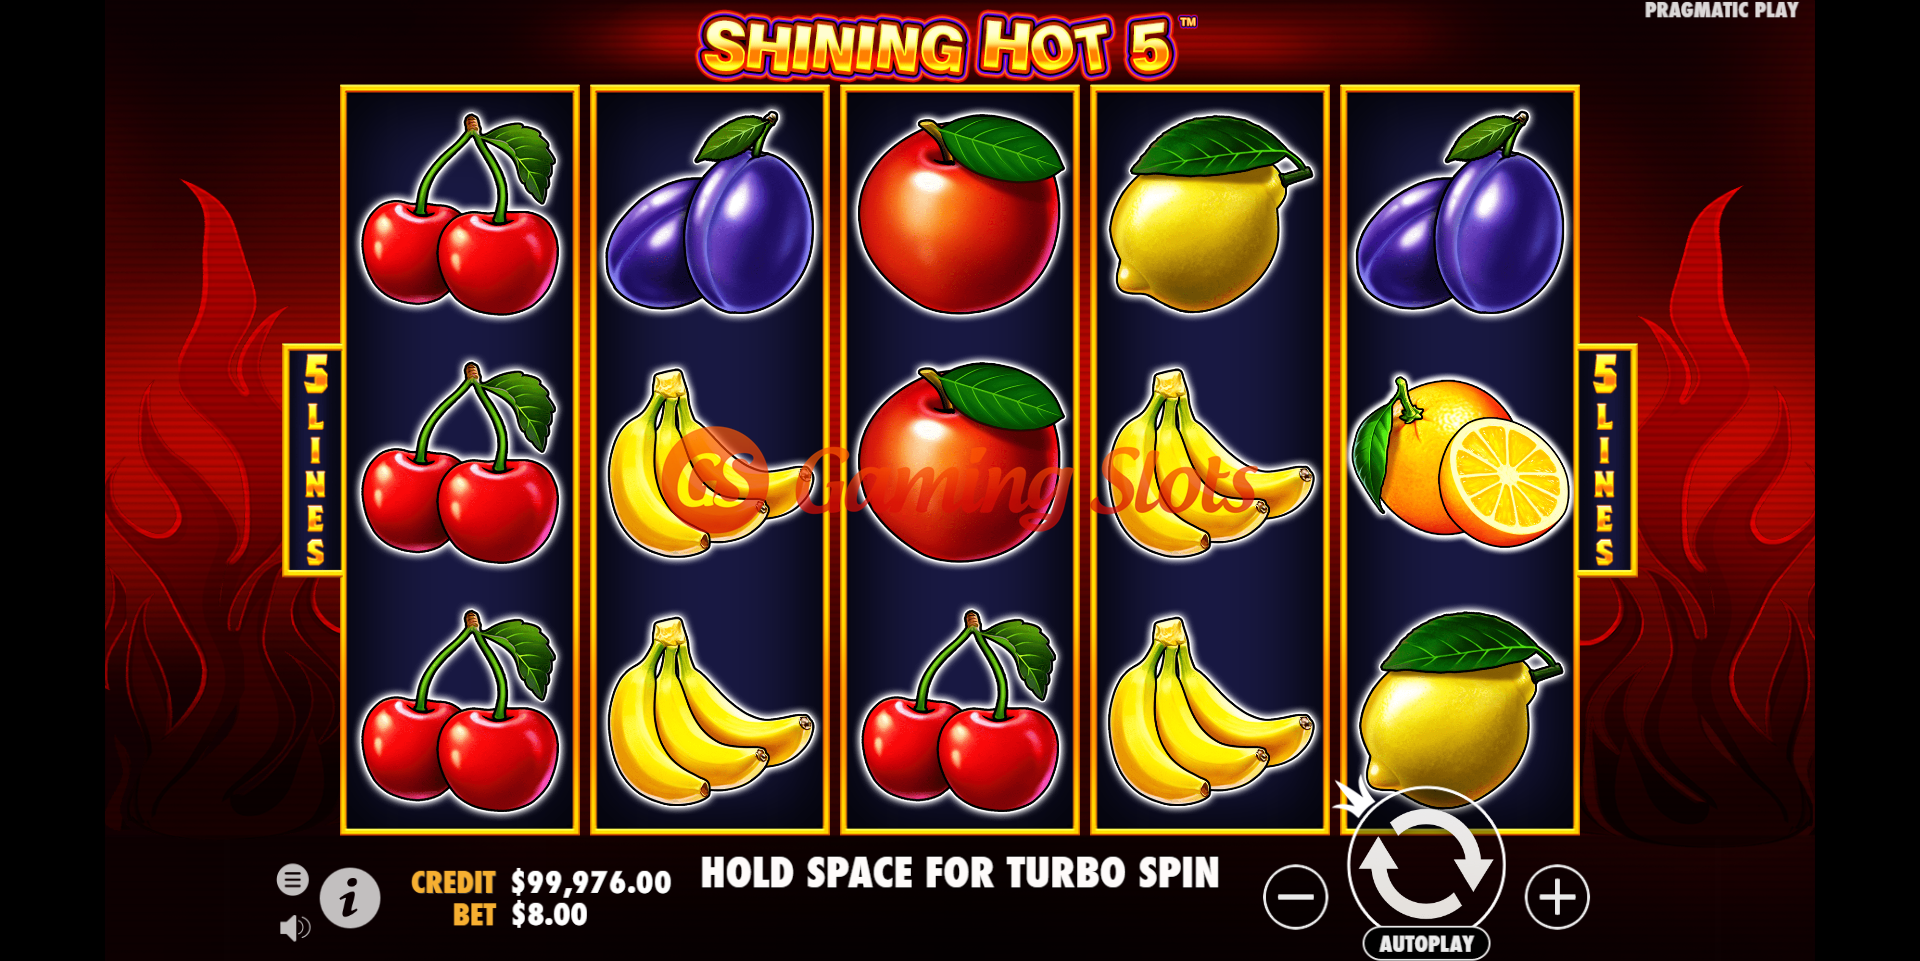 Base Game for Shining Hot 5 slot from Pragmatic Play